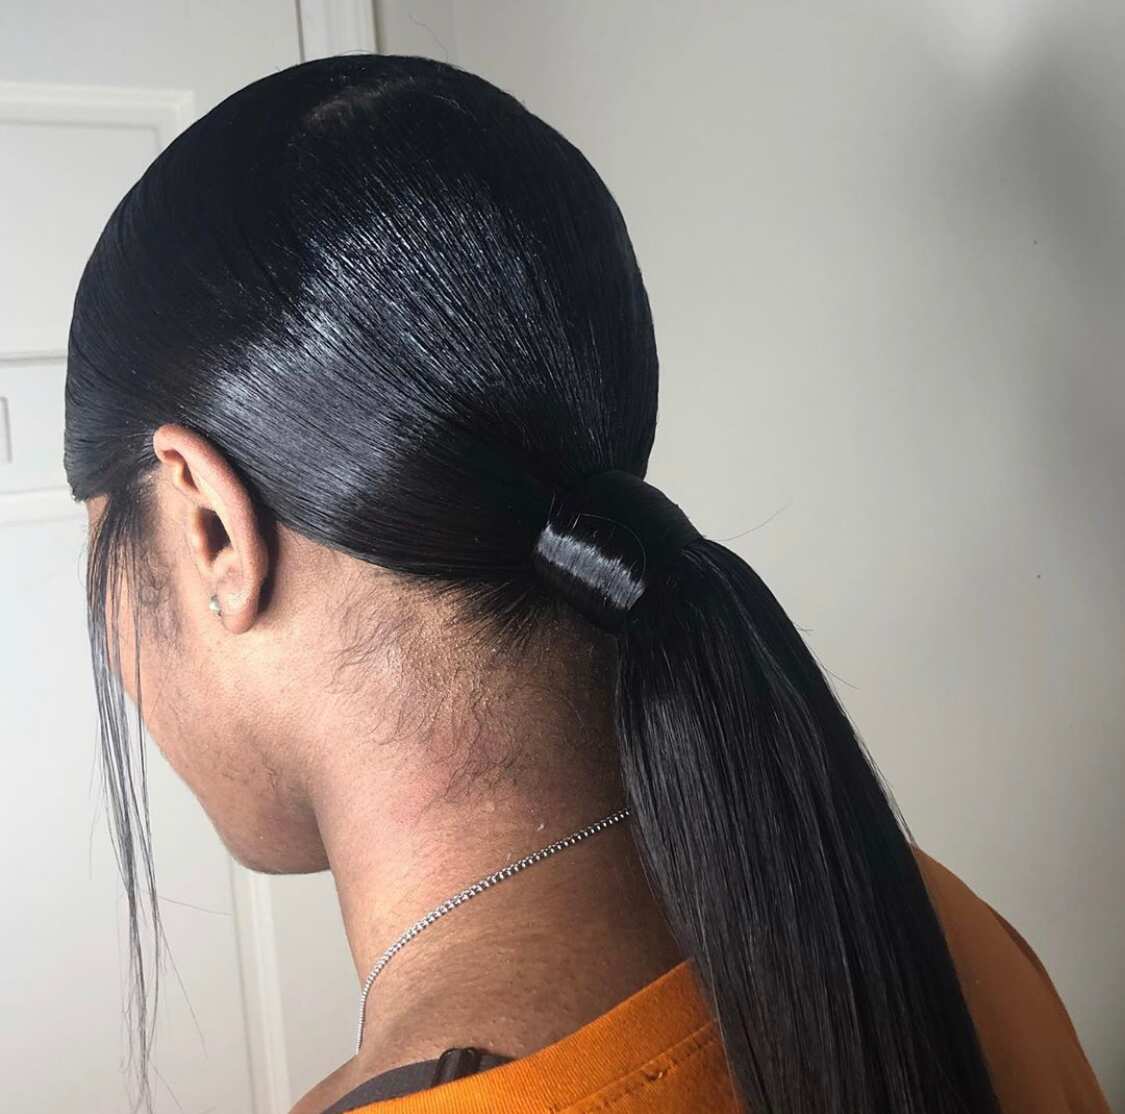 Kinky Curly Clip In Ponytail Extensions Human Hair In Black Girl Low Pony  Hairstyles, 140g From Divaswigszhou, $44.32 | DHgate.Com